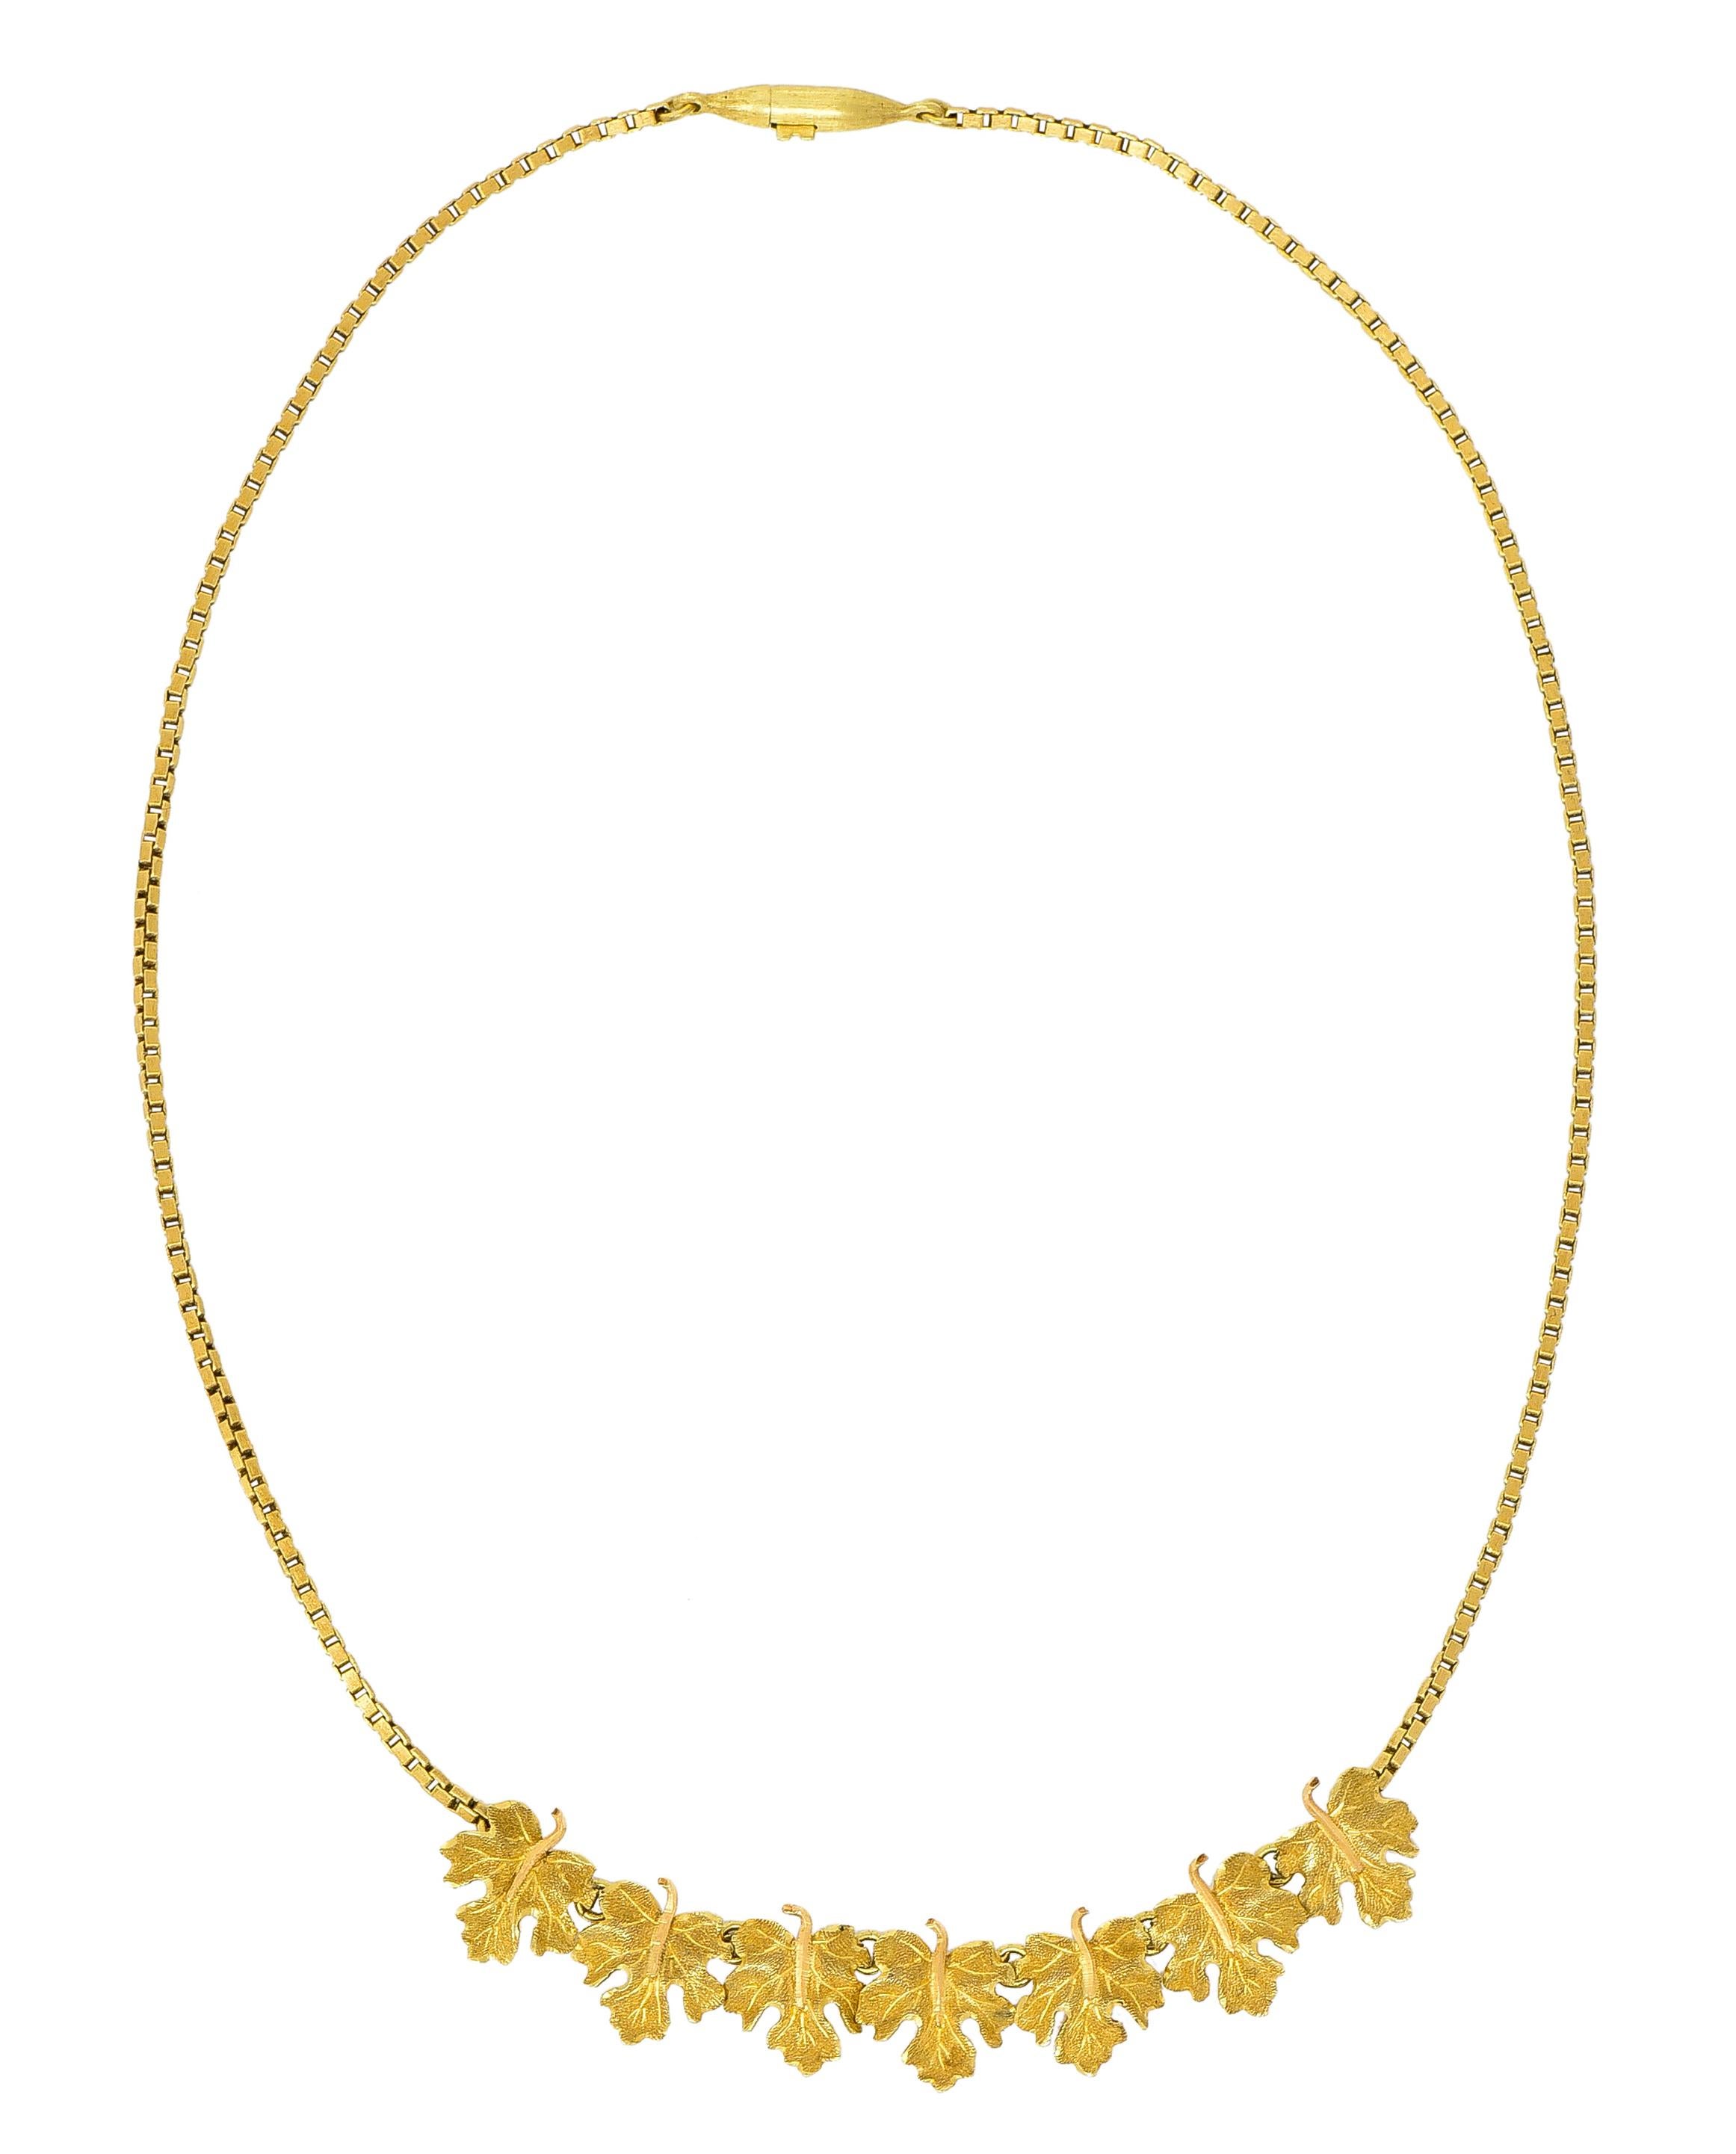 Necklace centers a station of seven highly rendered grape leaves

With fine stippled texture, delicately hand engraved veining, and rose gold stems

Connected by concealed jump rings and affixed to gold box chain completed by a barrel clasp

Fully